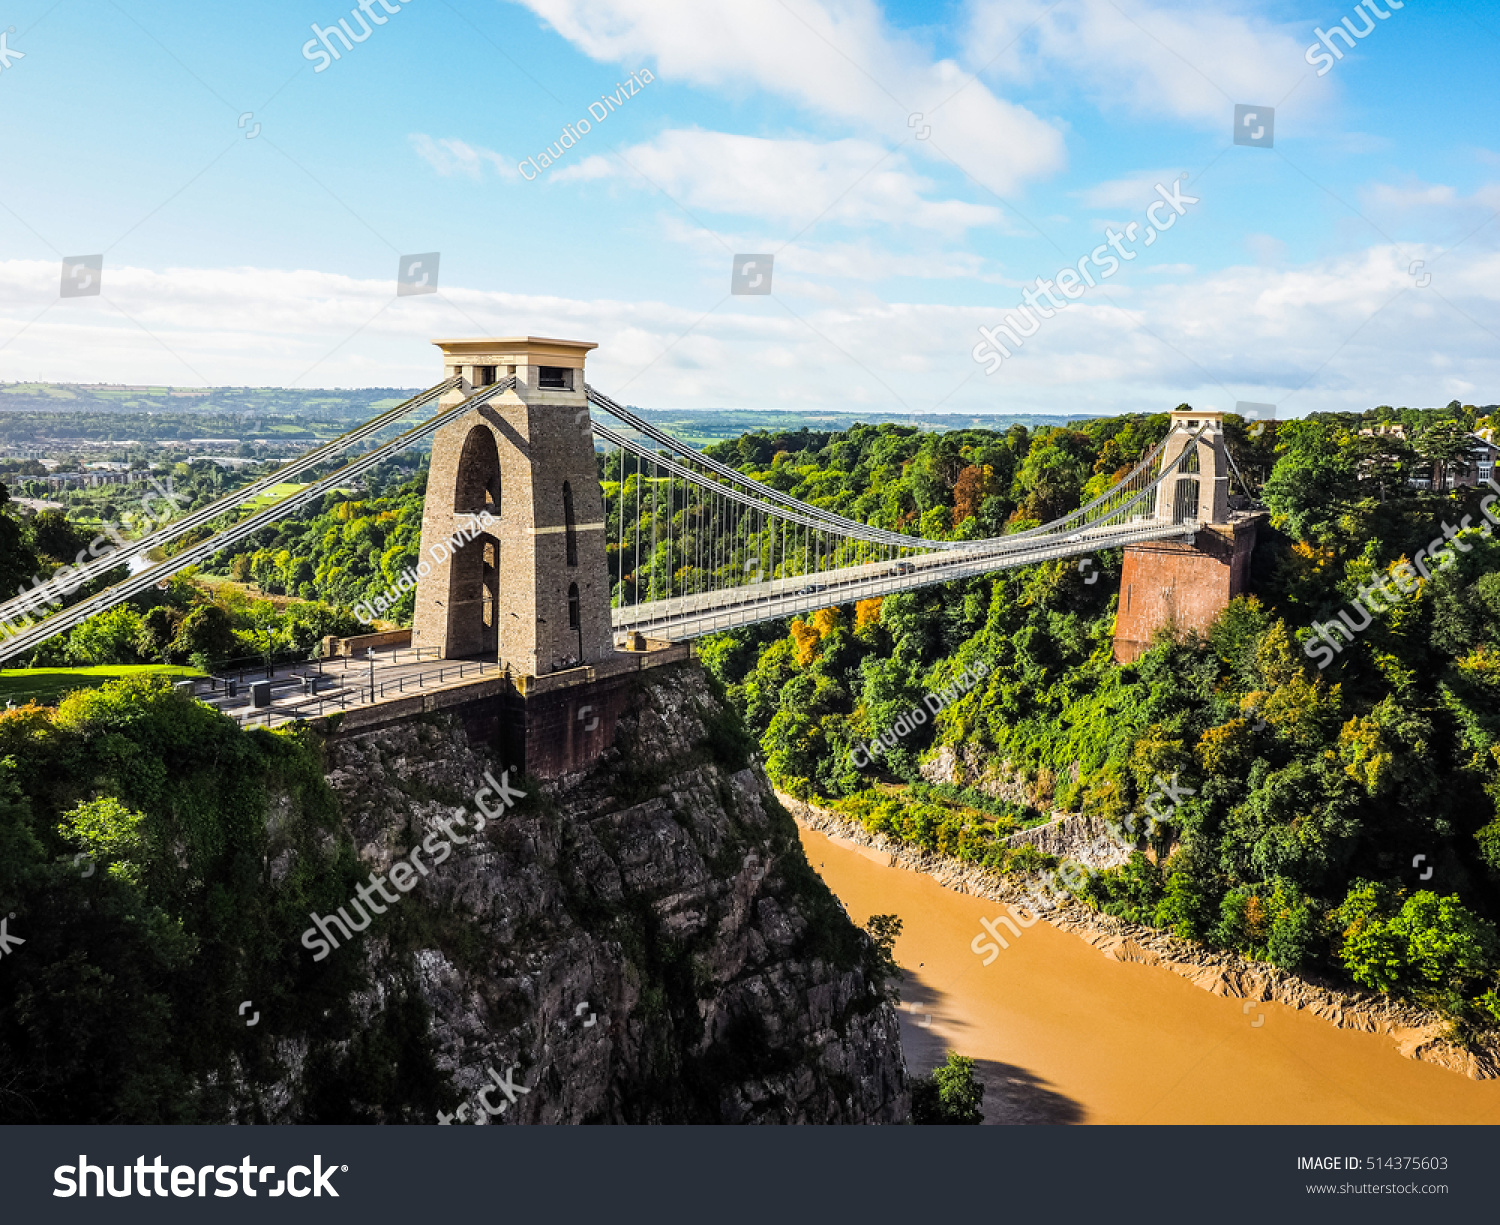 HDR Clifton Suspension Bridge spanning the Avon Gorge and River Avon designed by Brunel and completed in 1864 in Bristol, UK #514375603